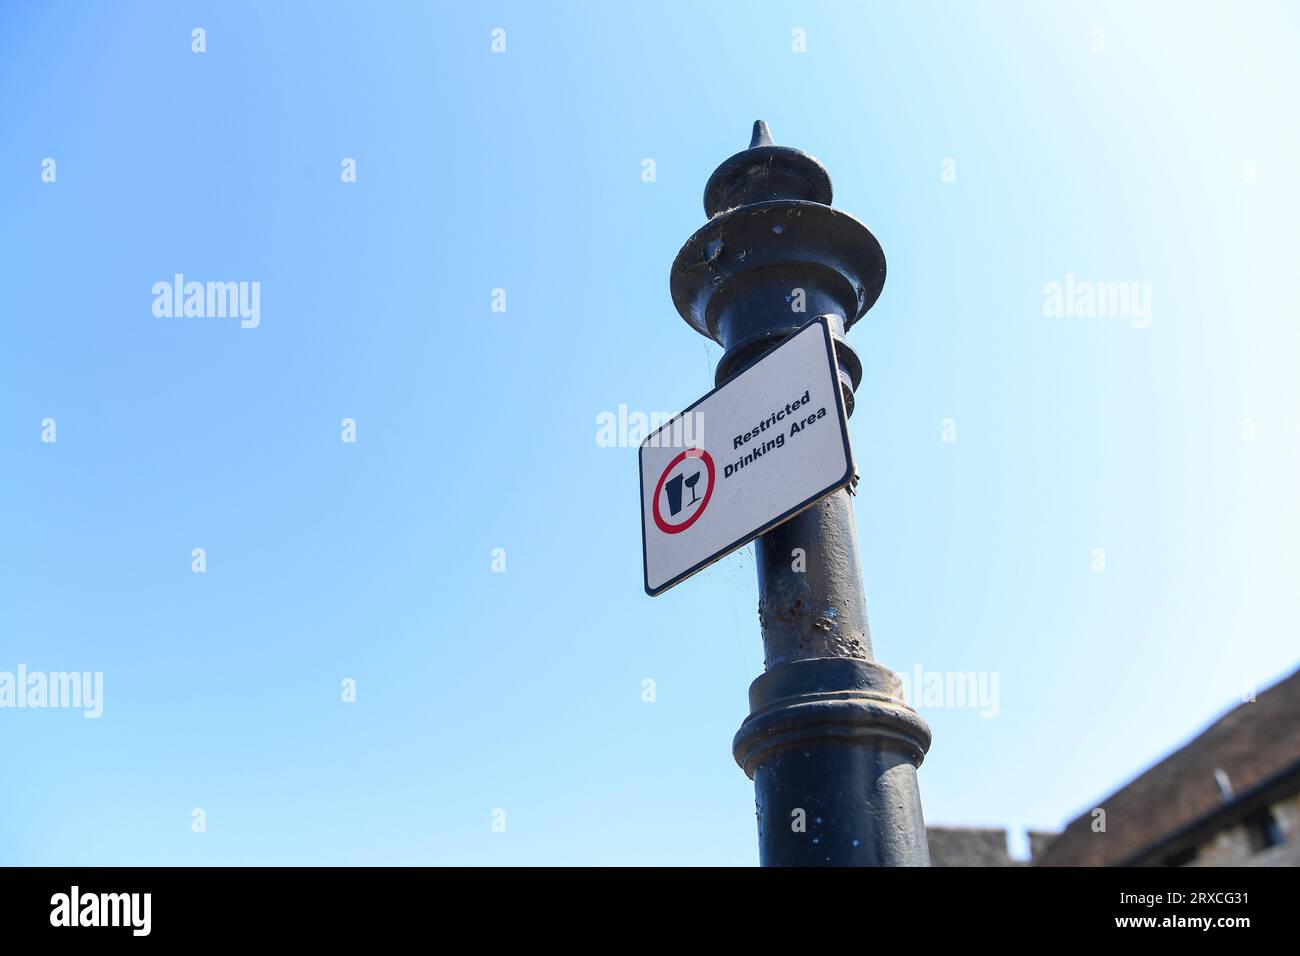 Restricted drinking area sign attached to lamppost in Southampton Hampshire England. The sign is situated outside Westquay area of the city centre. Stock Photo